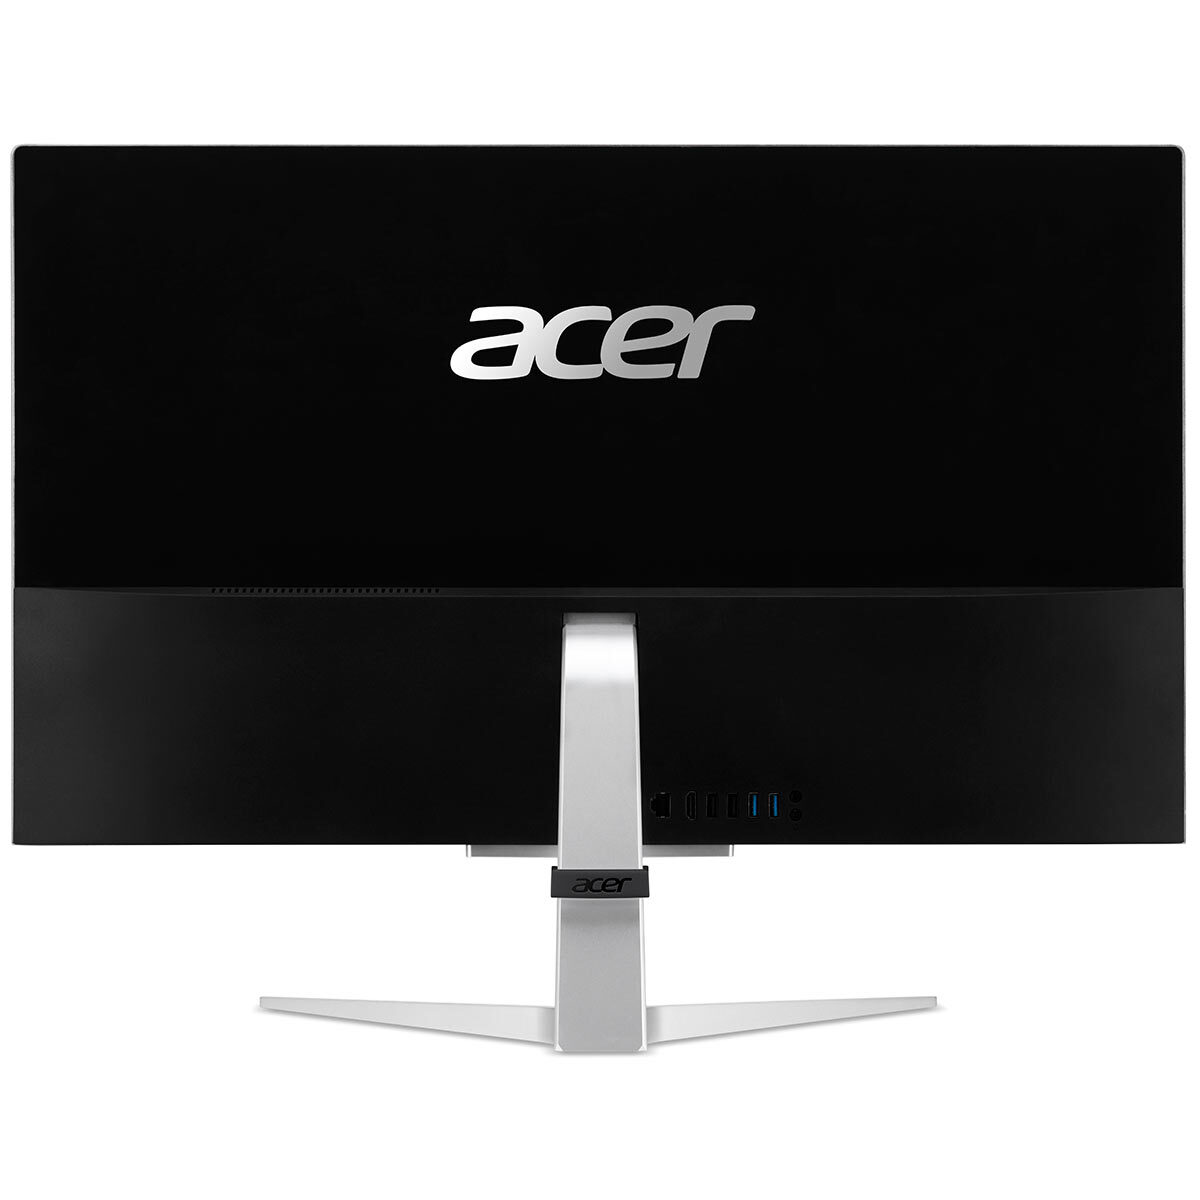 Buy Acer Aspire C27, Intel Core i5, 8GB RAM, 512GB SSD + 1TB HDD, NVIDIA GeForce MX250, 27 Inch, All in One Desktop PC, DQ.BDPEK.00A at costco.co.uk